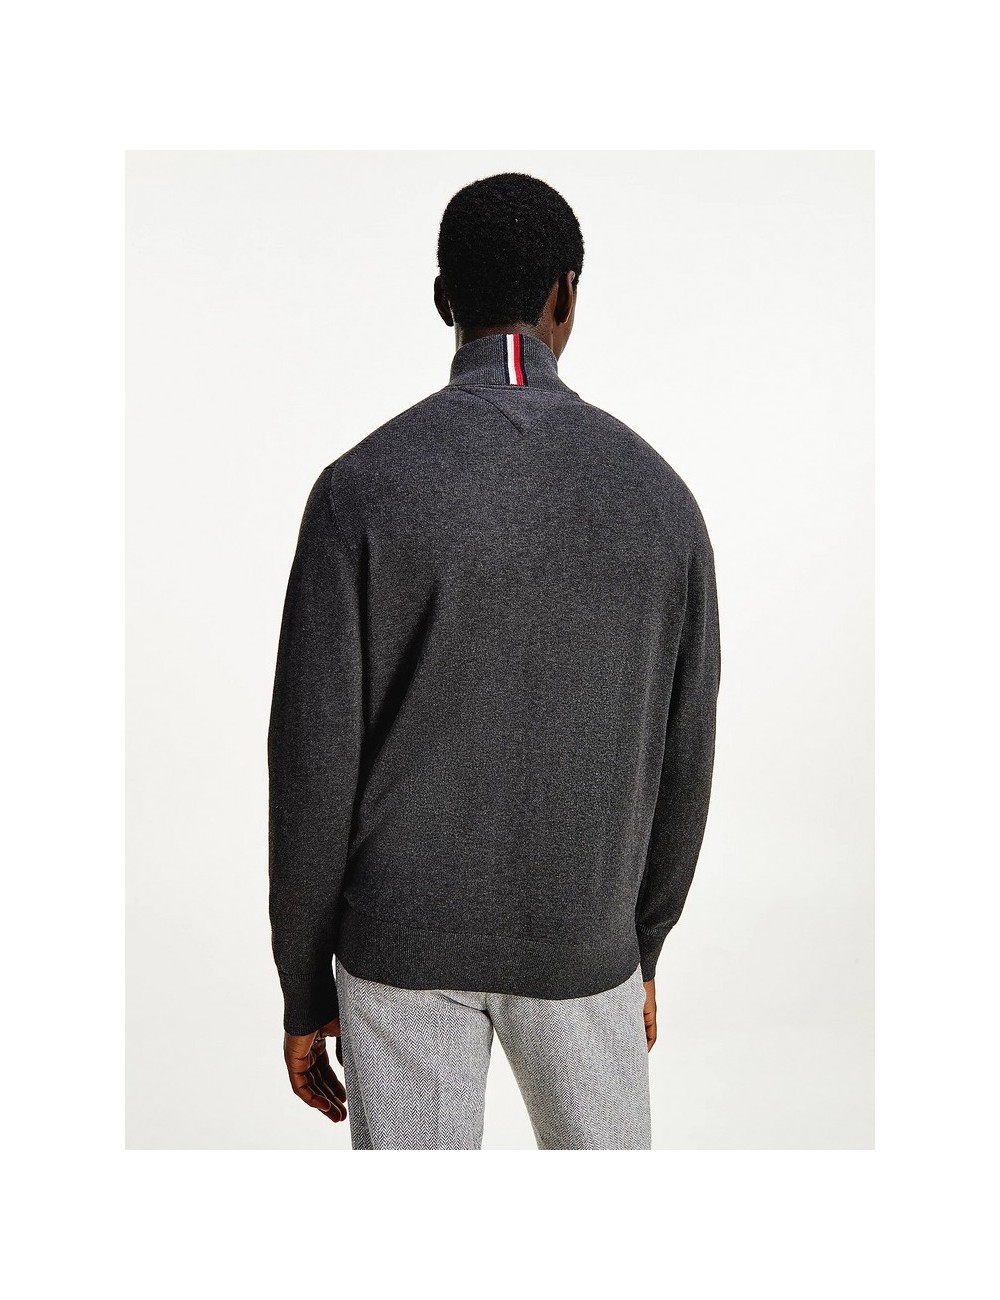 JERSEY HOMBRE TOMMY HILFIGER GRIS OSCURO